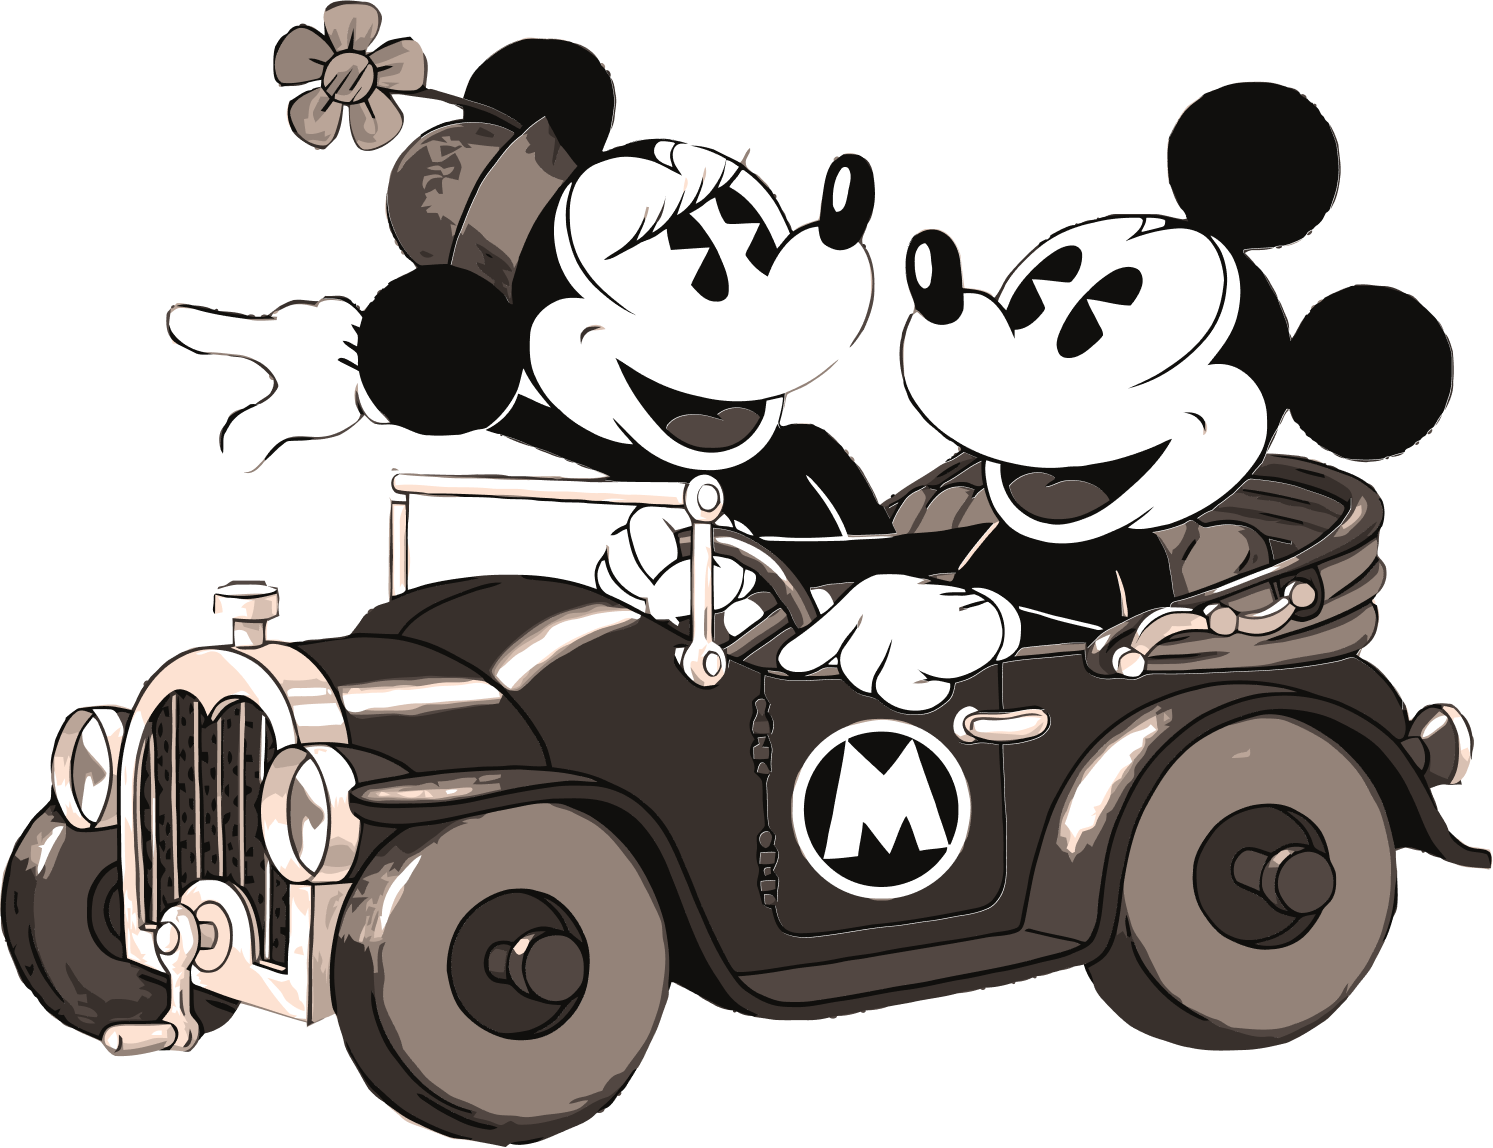 A mouse and his girlfriend in a car.